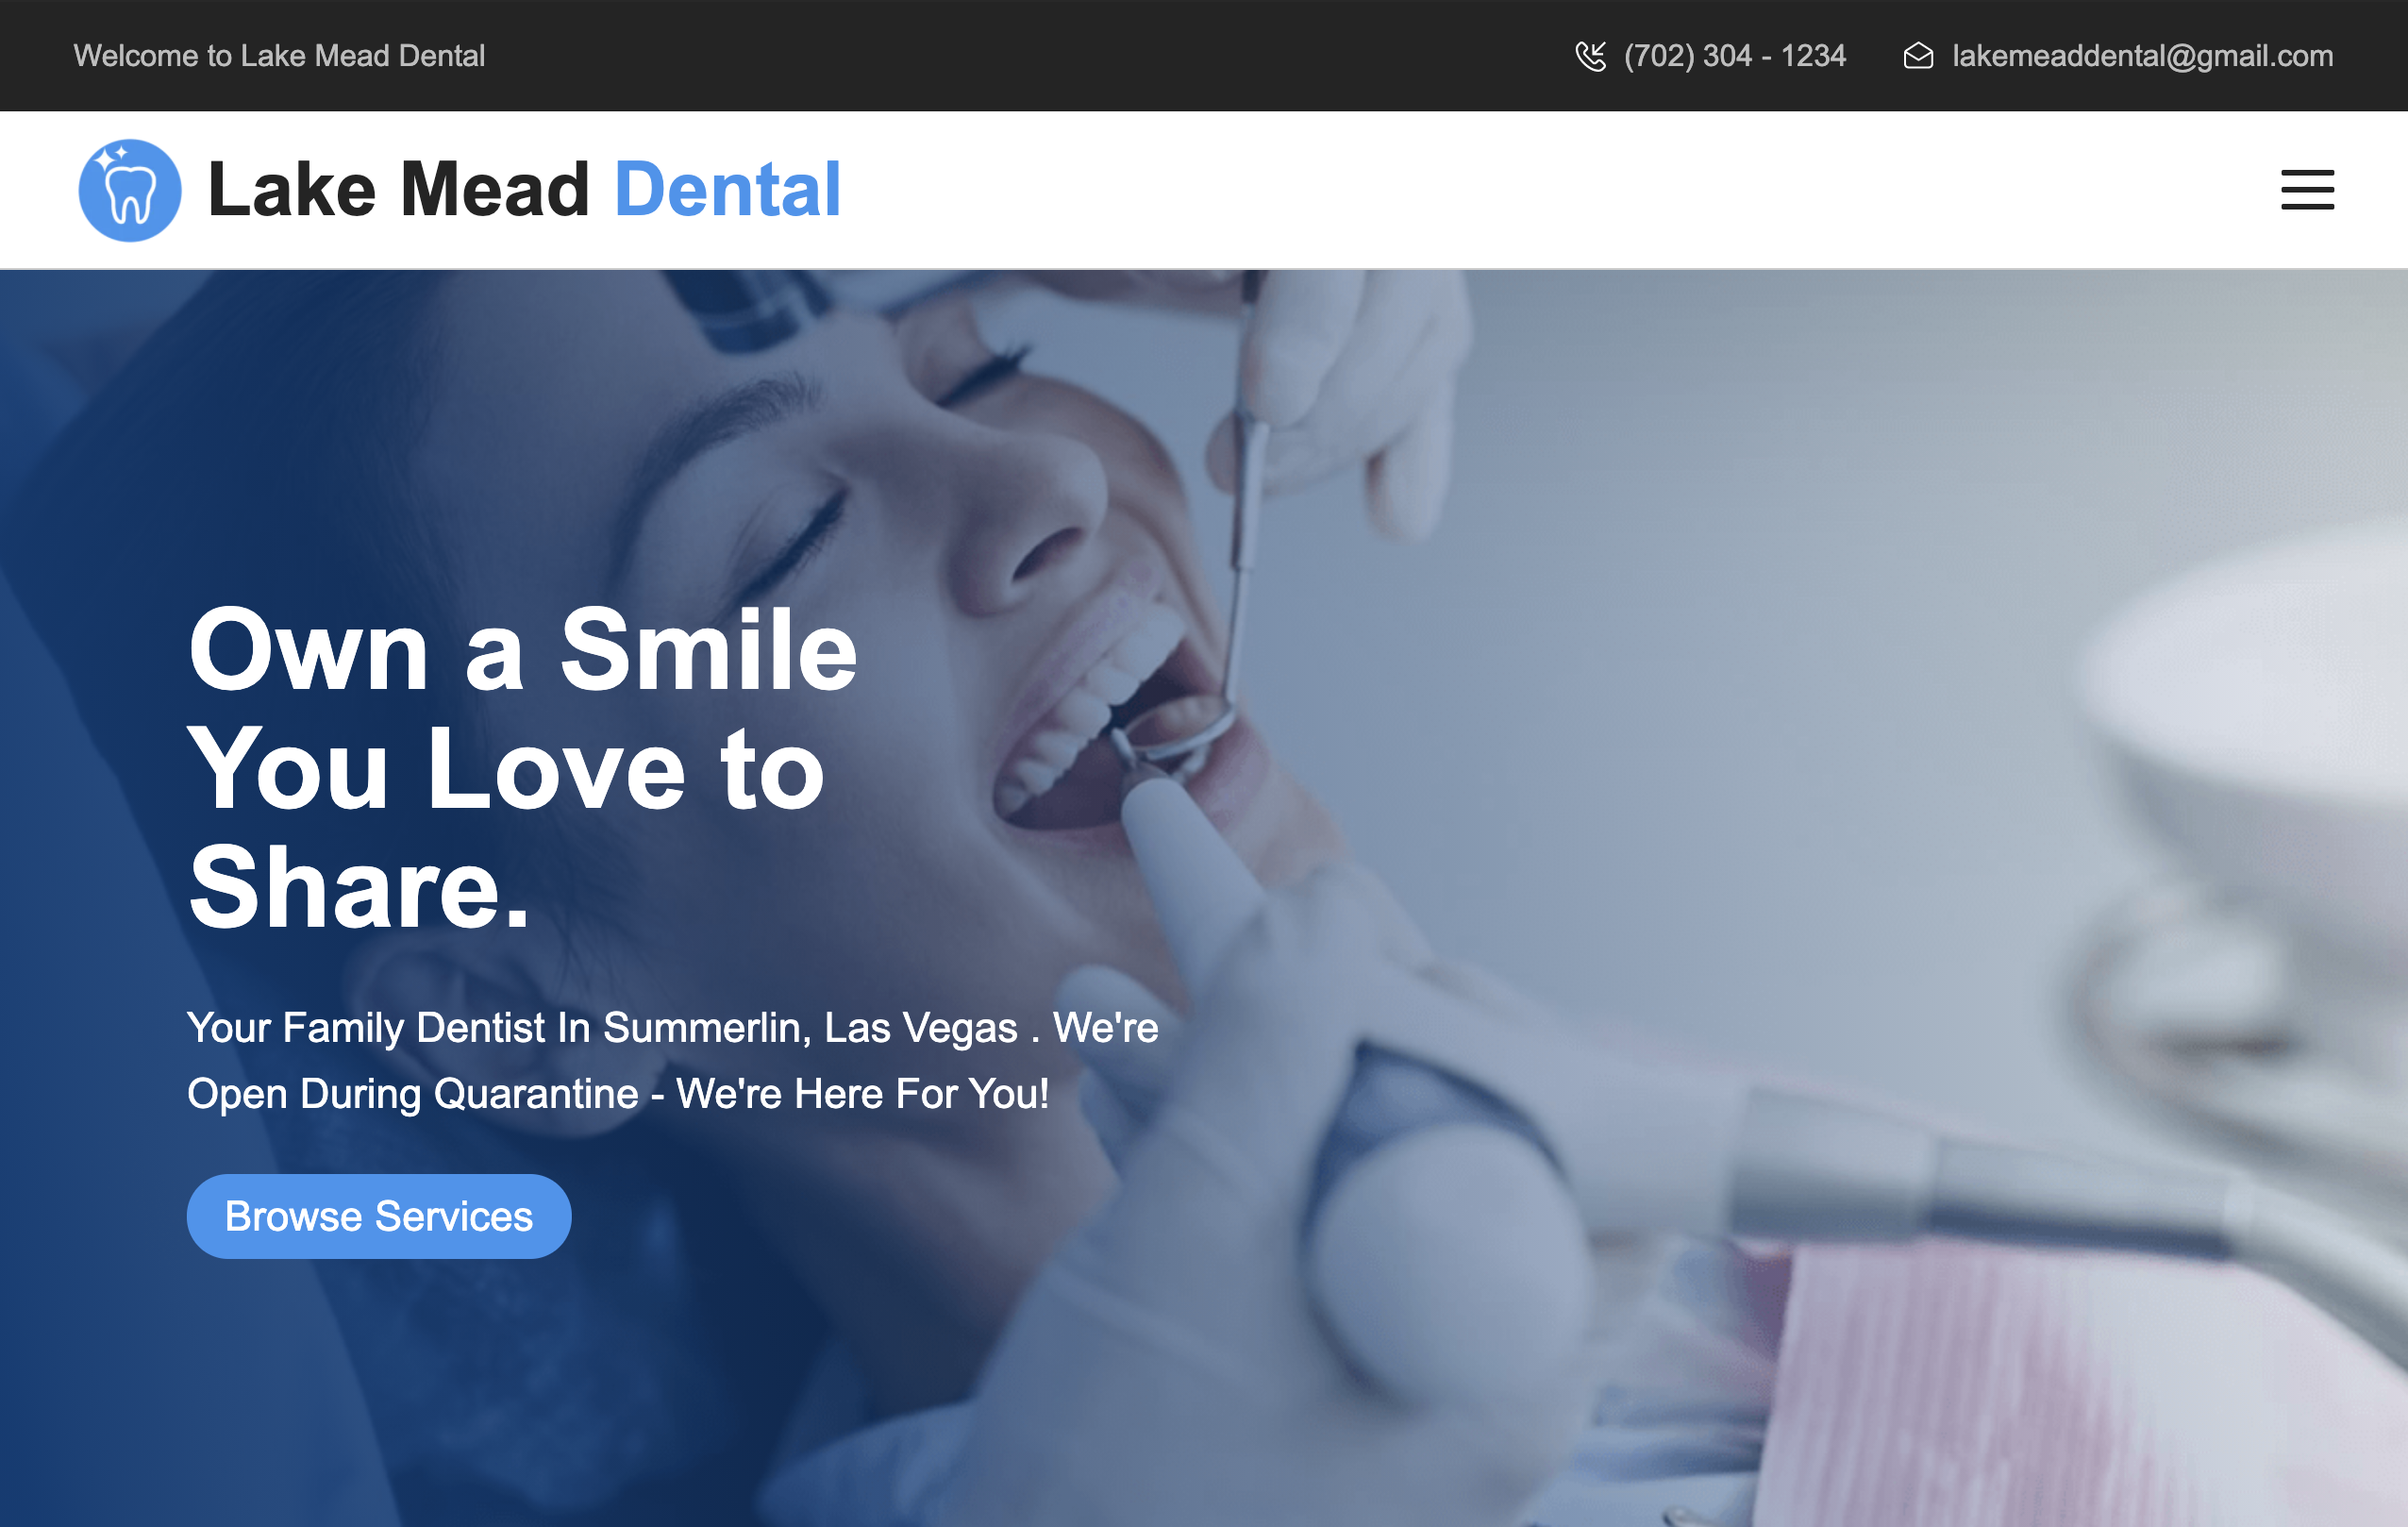 Dentist Las Vegas  Cosmetic Dentist - WELCOME TO COMPLETE DENTAL